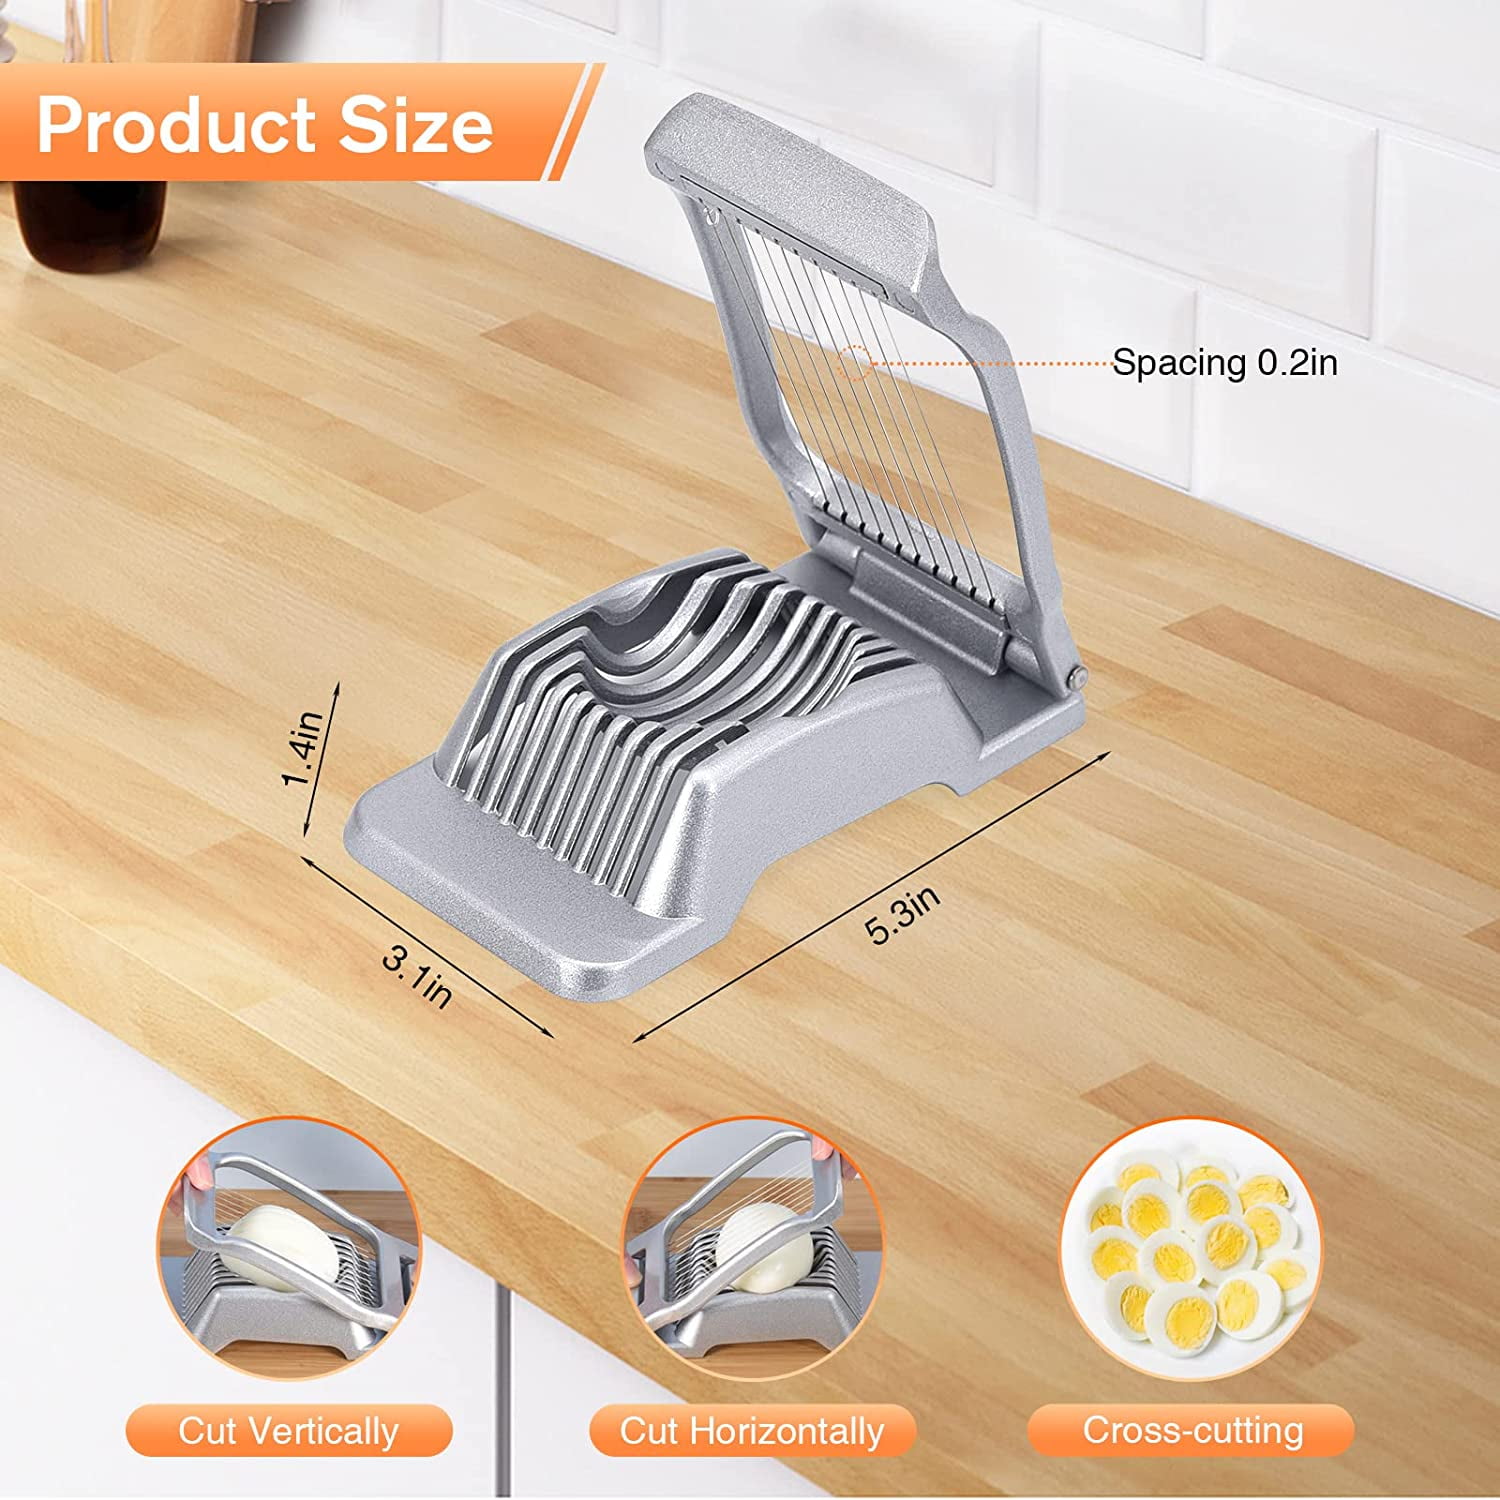 HXAZGSJA Egg Cutter Stainless Steel Wire Egg Slicer Portable for Hard  Boiled Eggs Home Kitchen 